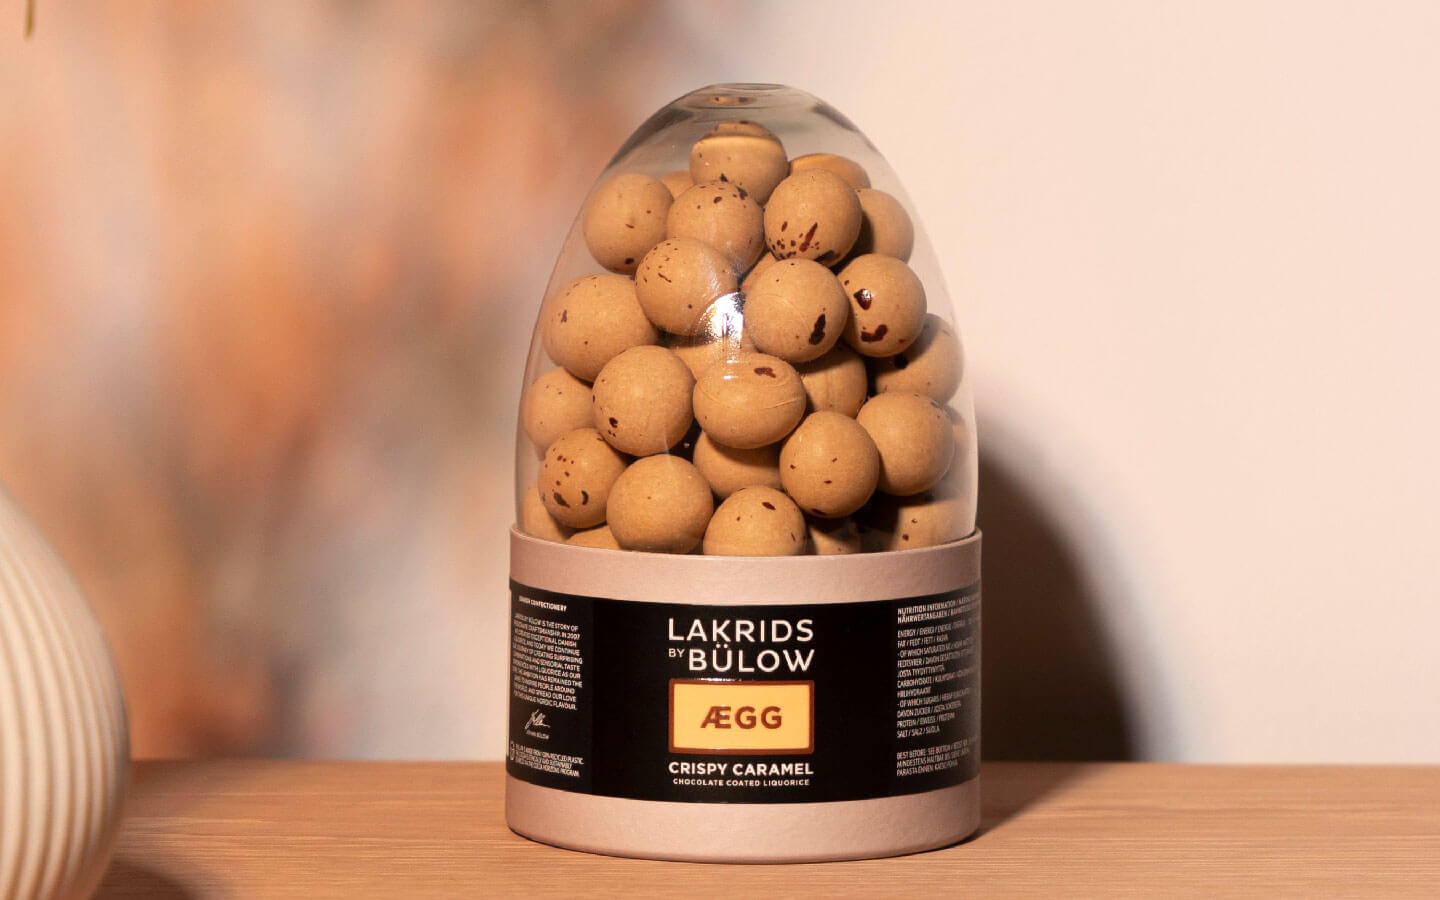 Lakrids by bulow egg